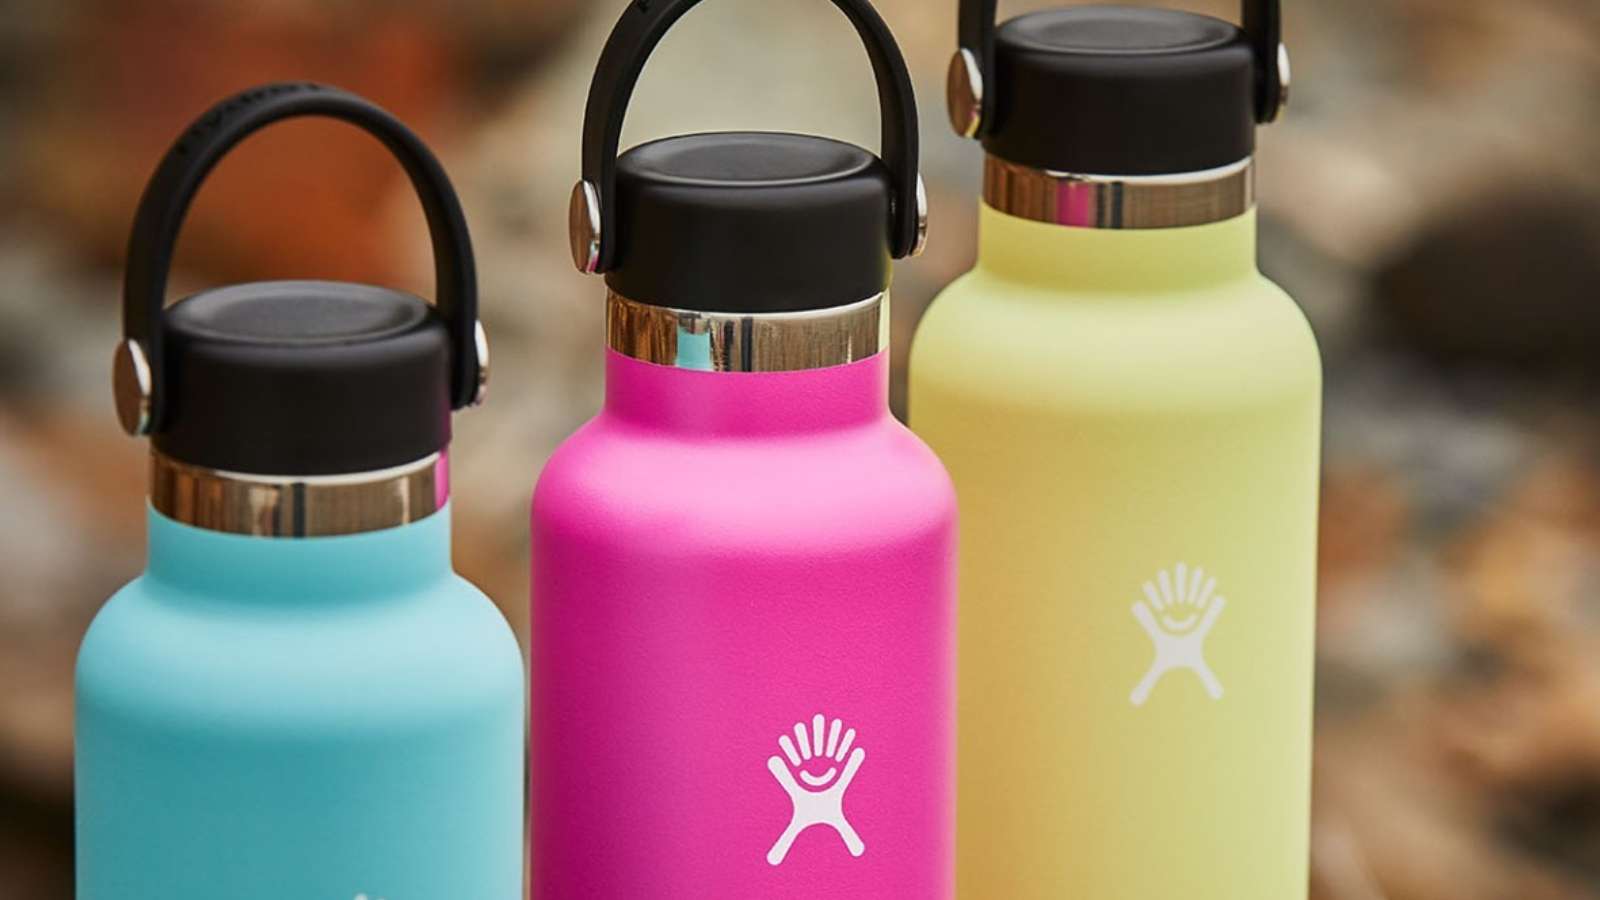 hydro flask bottles blue, pink and yellow